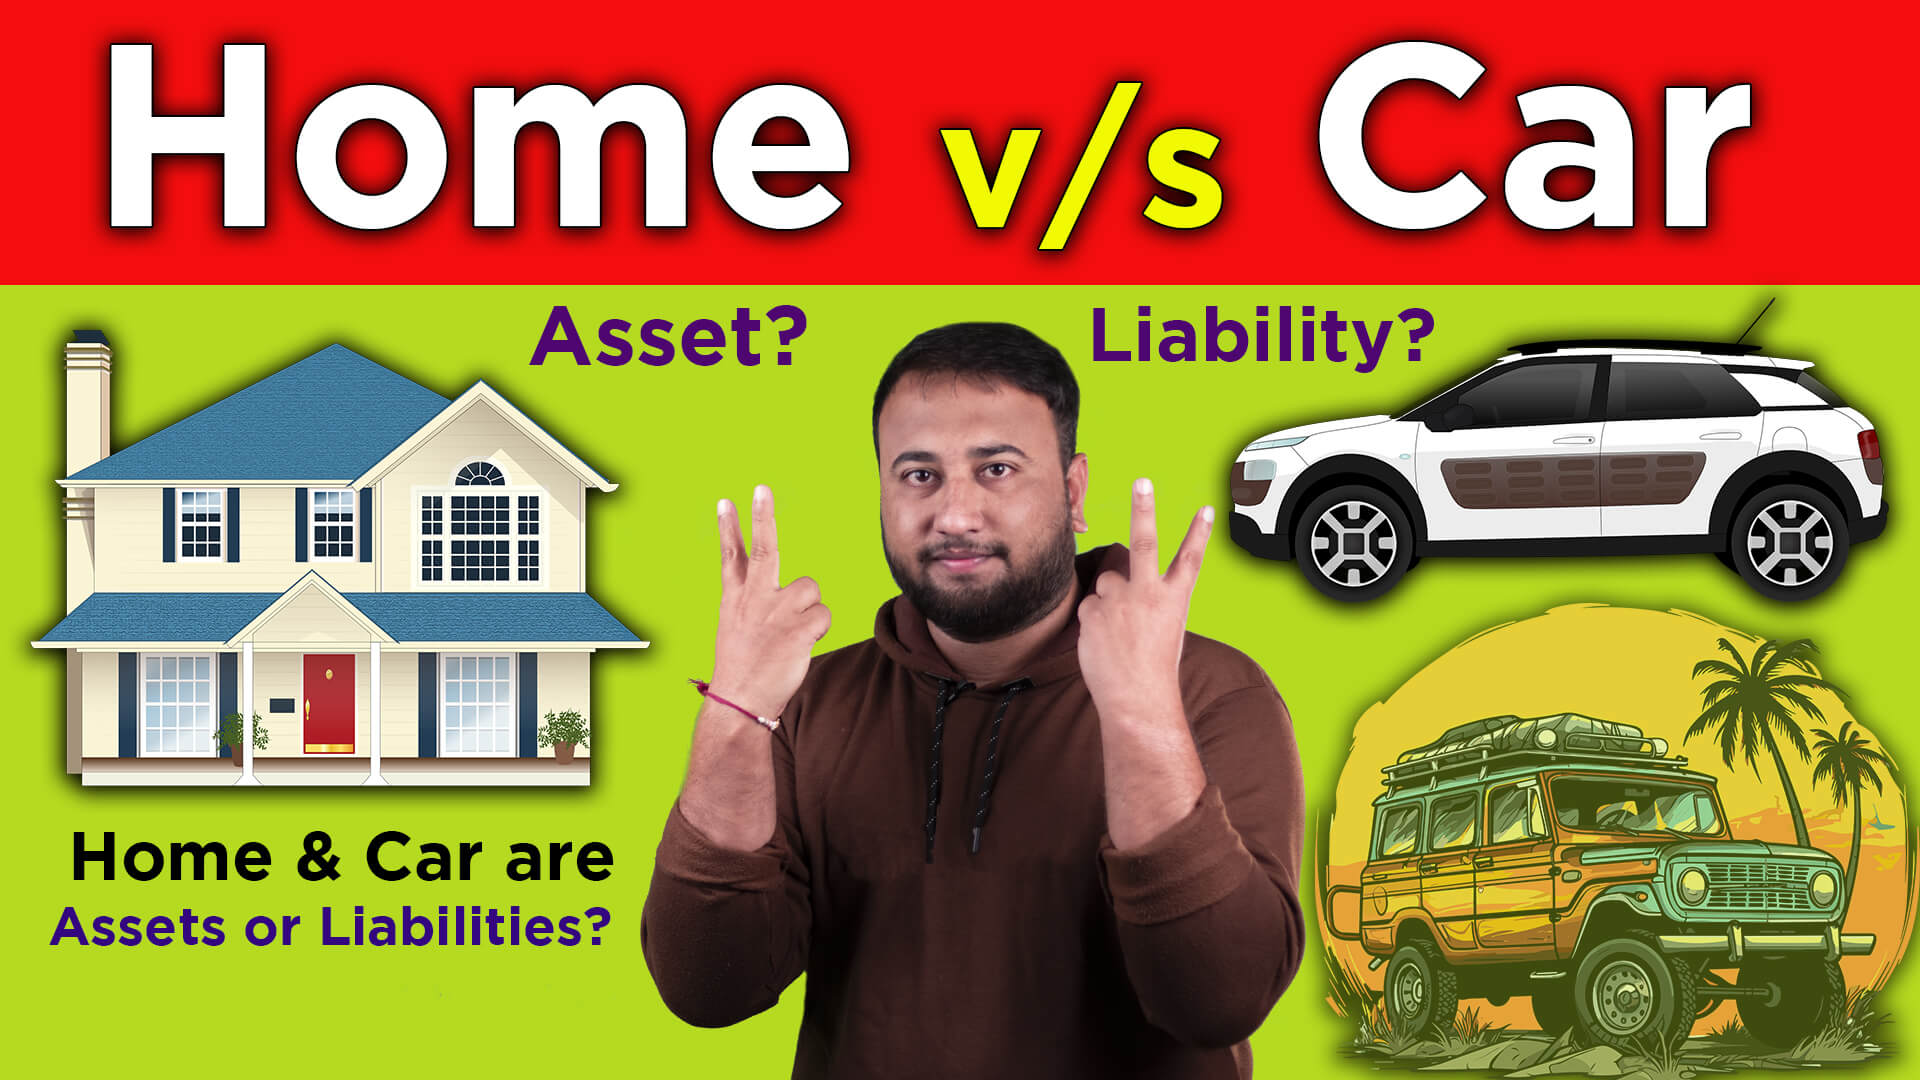 You are currently viewing Home v/s Car – Home & Car are Assets or Liabilities? Which one is best?